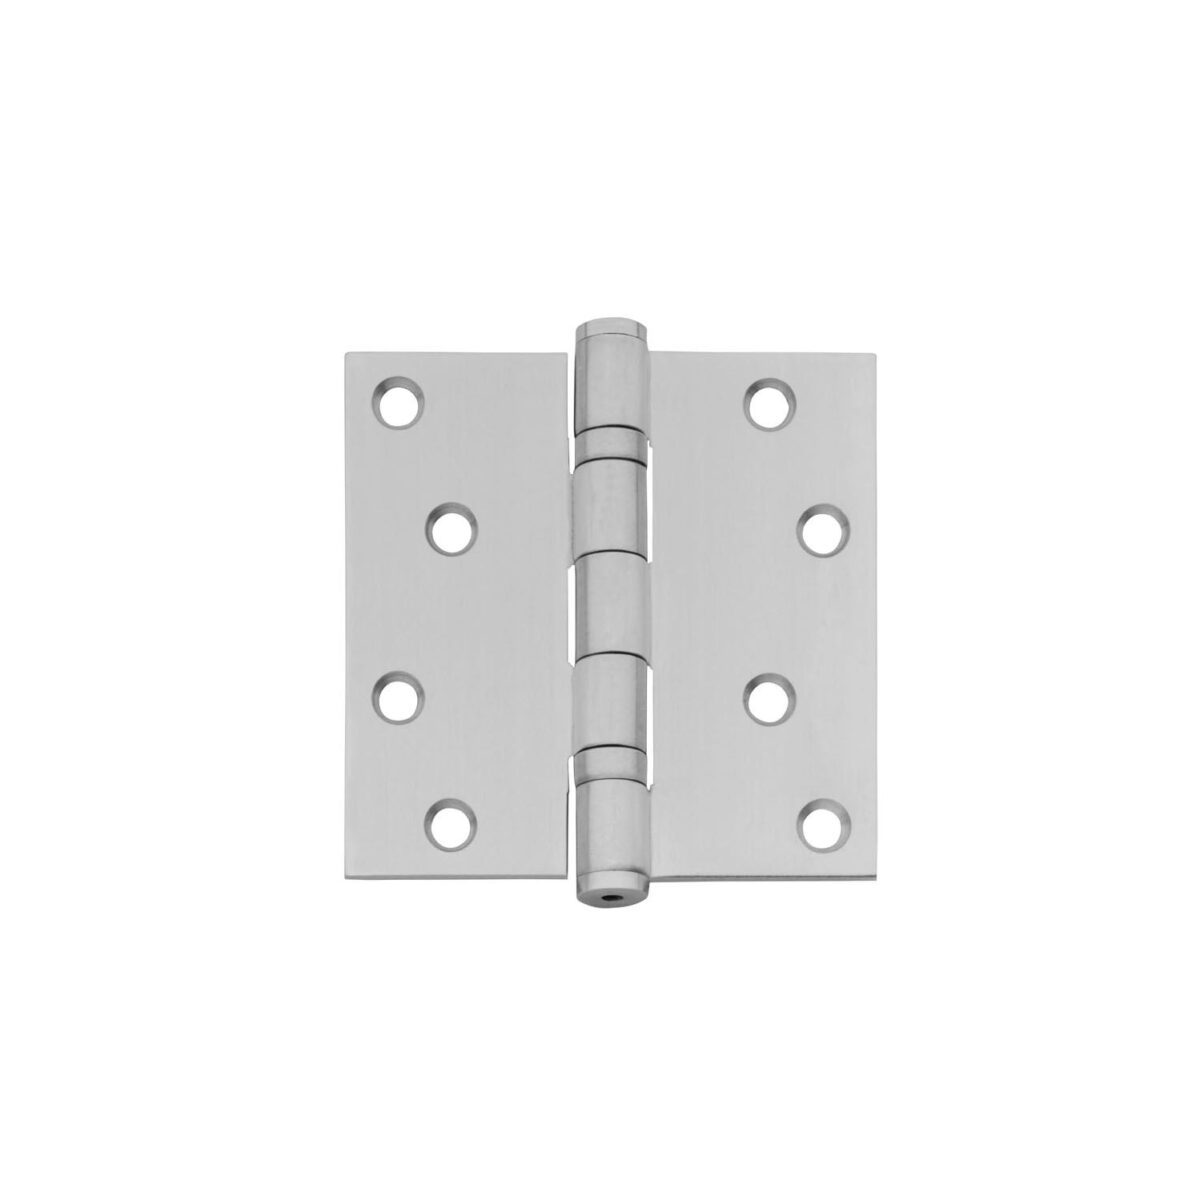 Ball bearing hinge 89 x 89 mm with right angle brushed stainless steel incl. screws